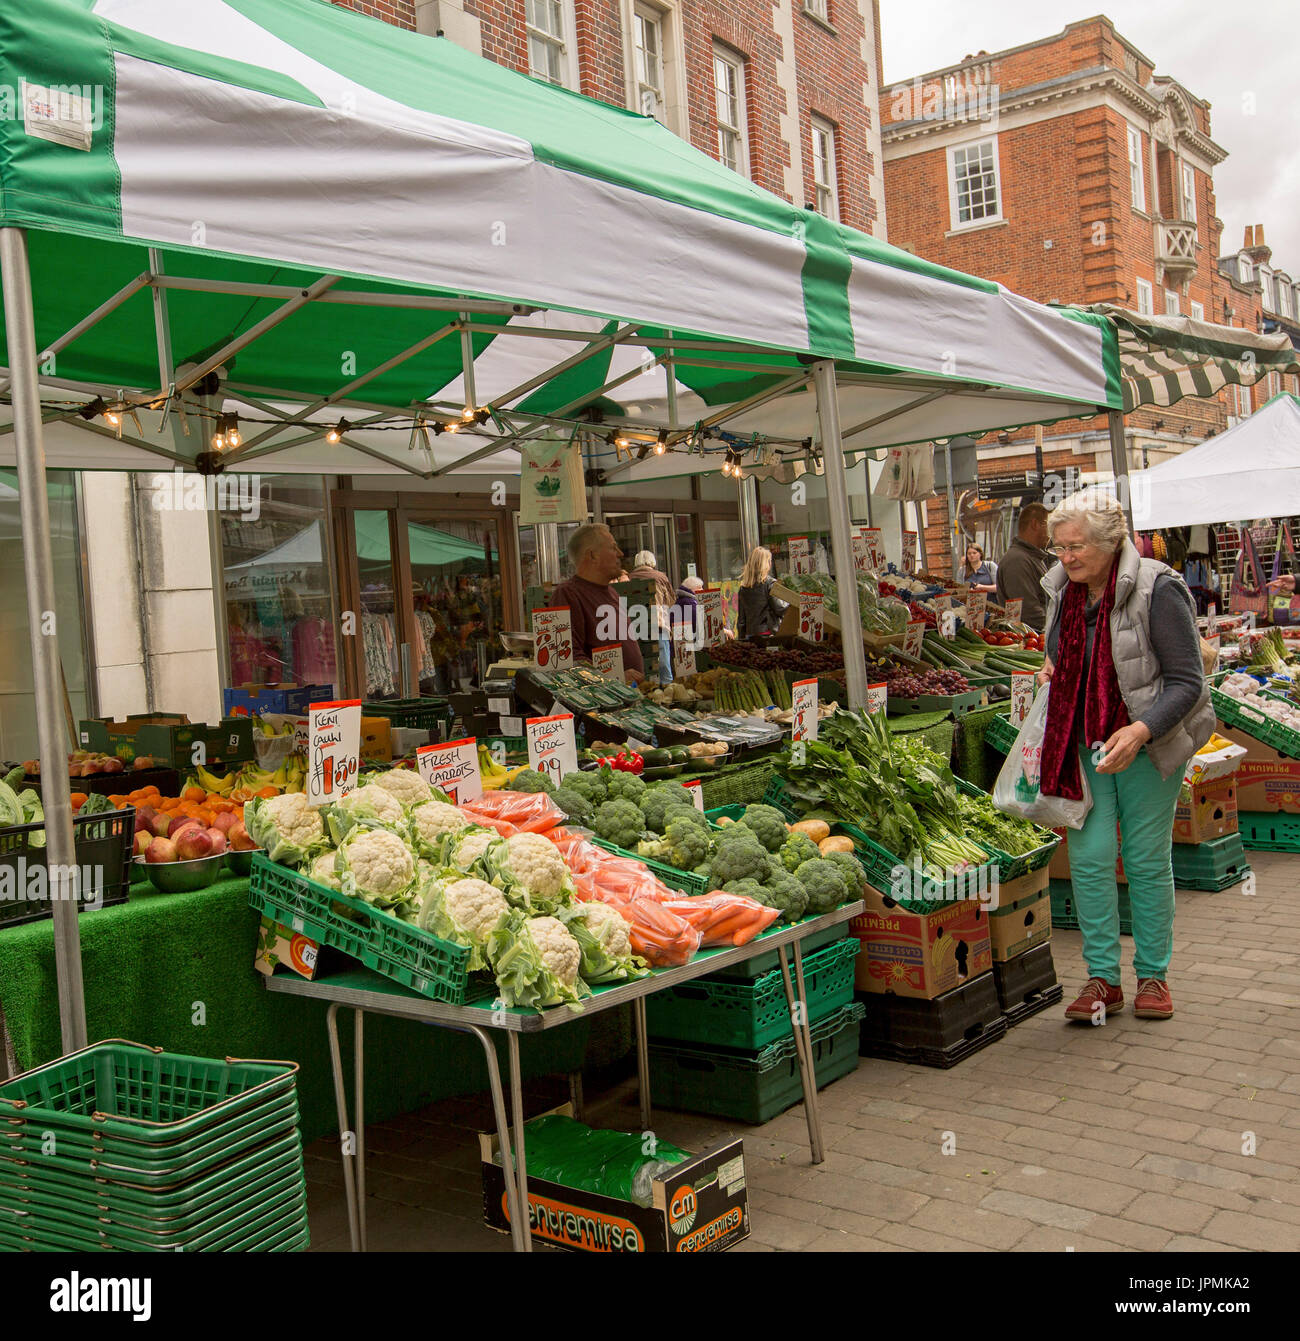 Fruit & vegetable stall with elderly woman looking at colourful fresh produce under green & white awning at street market in Winchester, England Stock Photo